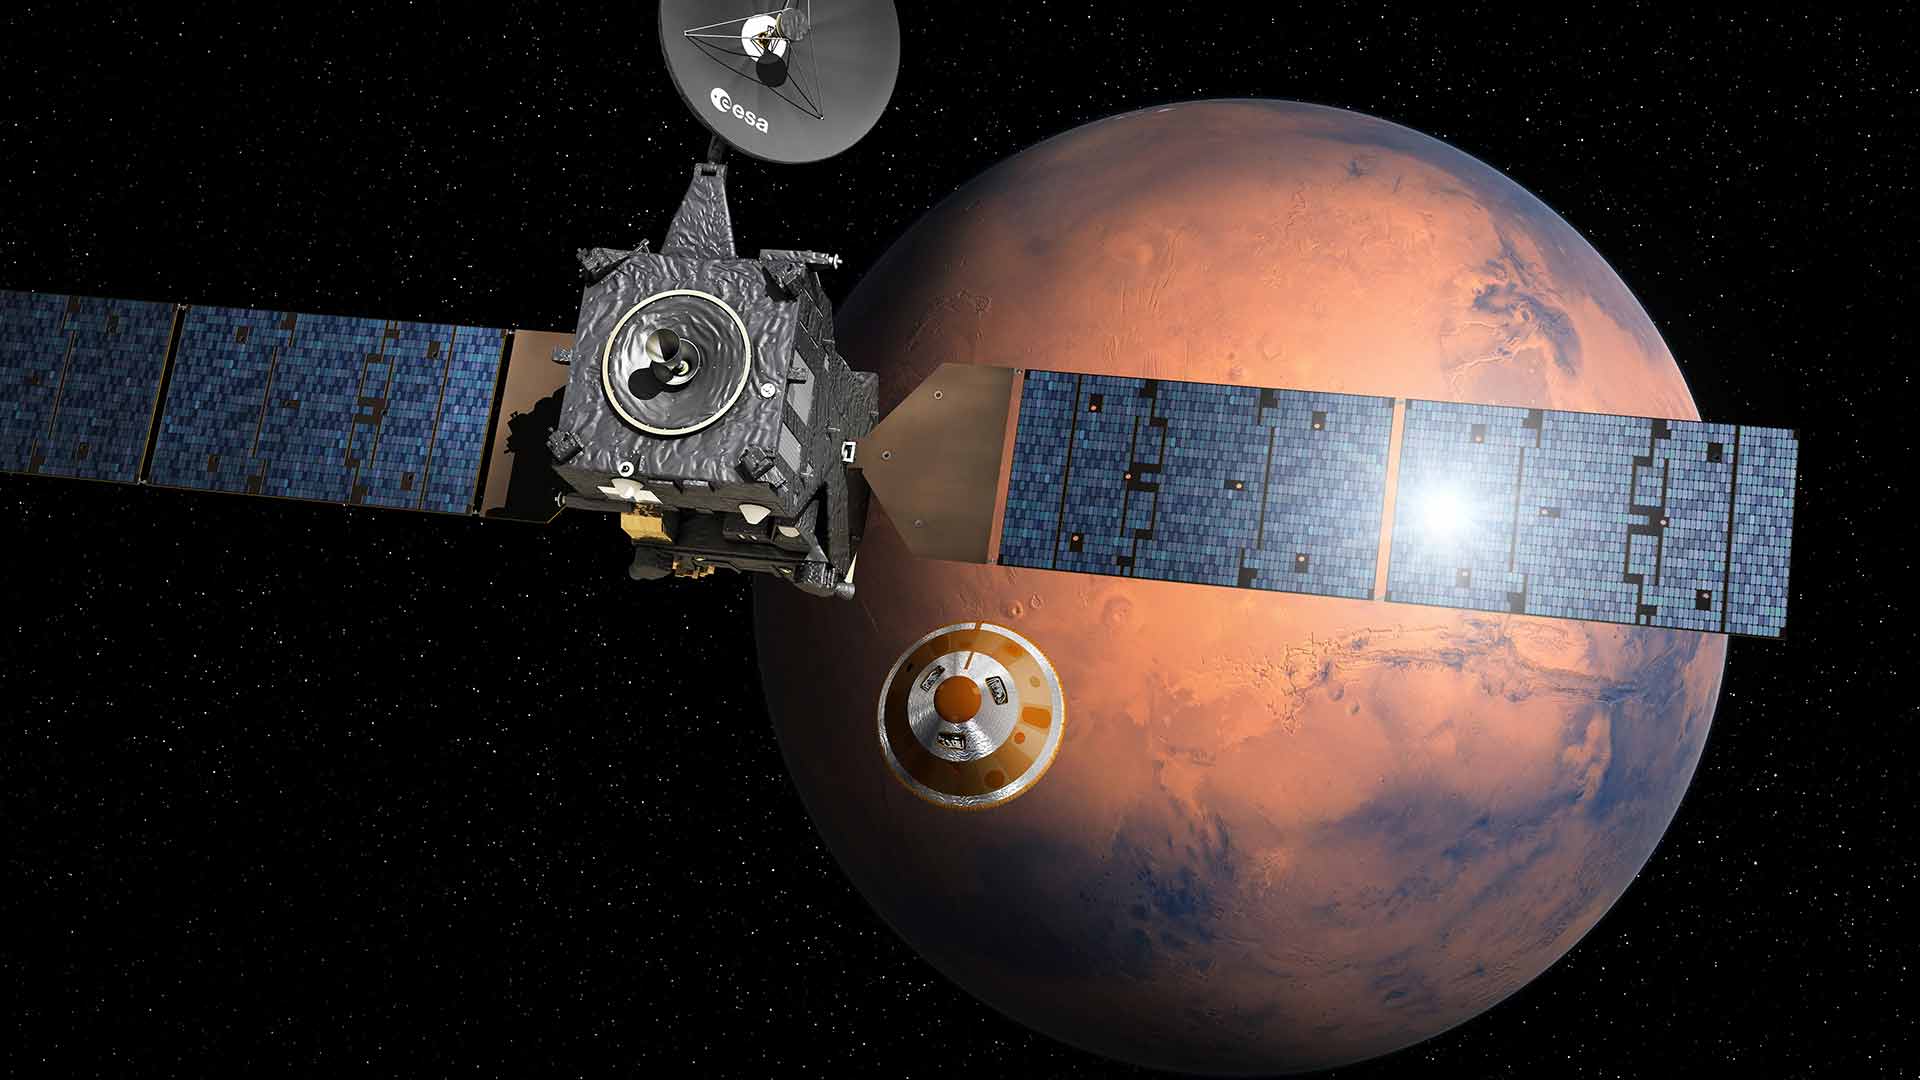 Artist’s impression provided by the European Space Agency, ESA, depicting the separation of the ExoMars 2016 entry, descent and landing demonstrator module, named Schiaparelli, center, from the Trace Gas Orbiter, TGO, and heading for Mars. The separation is scheduled to occur on Sunday Oct. 16, 2016, about seven months after launch. (ESA/D. Ducros via AP)